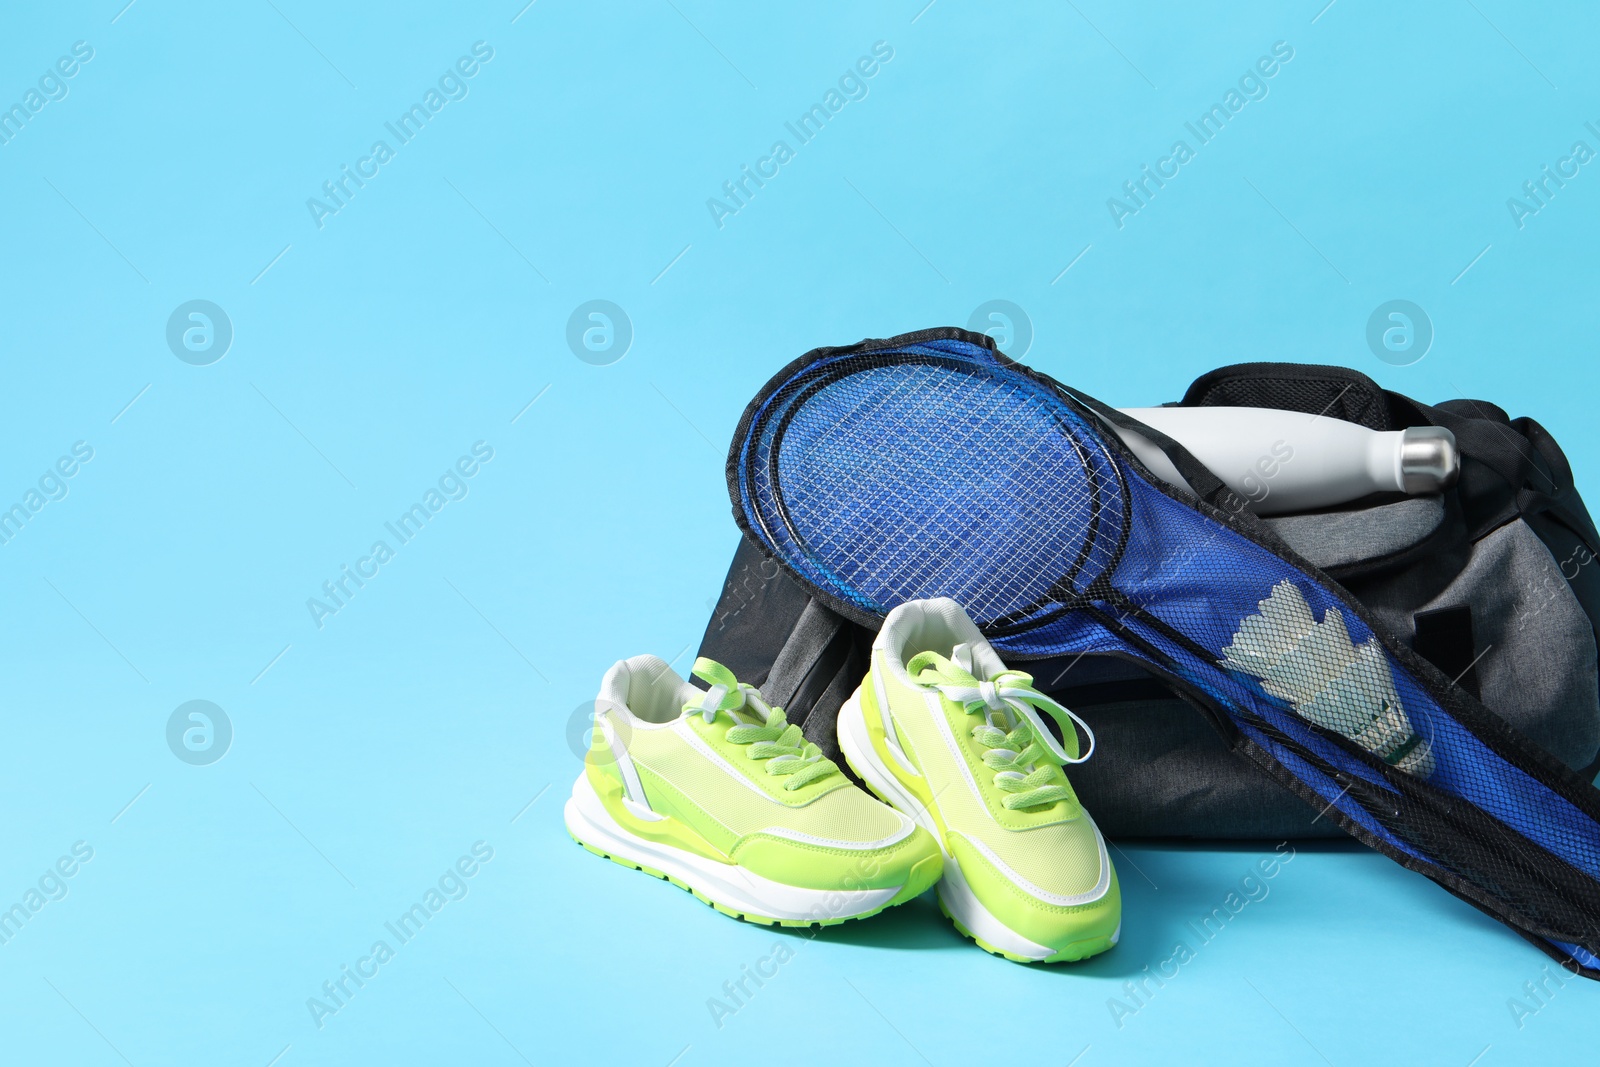 Photo of Badminton set, bag, sneakers and bottle on light blue background, space for text